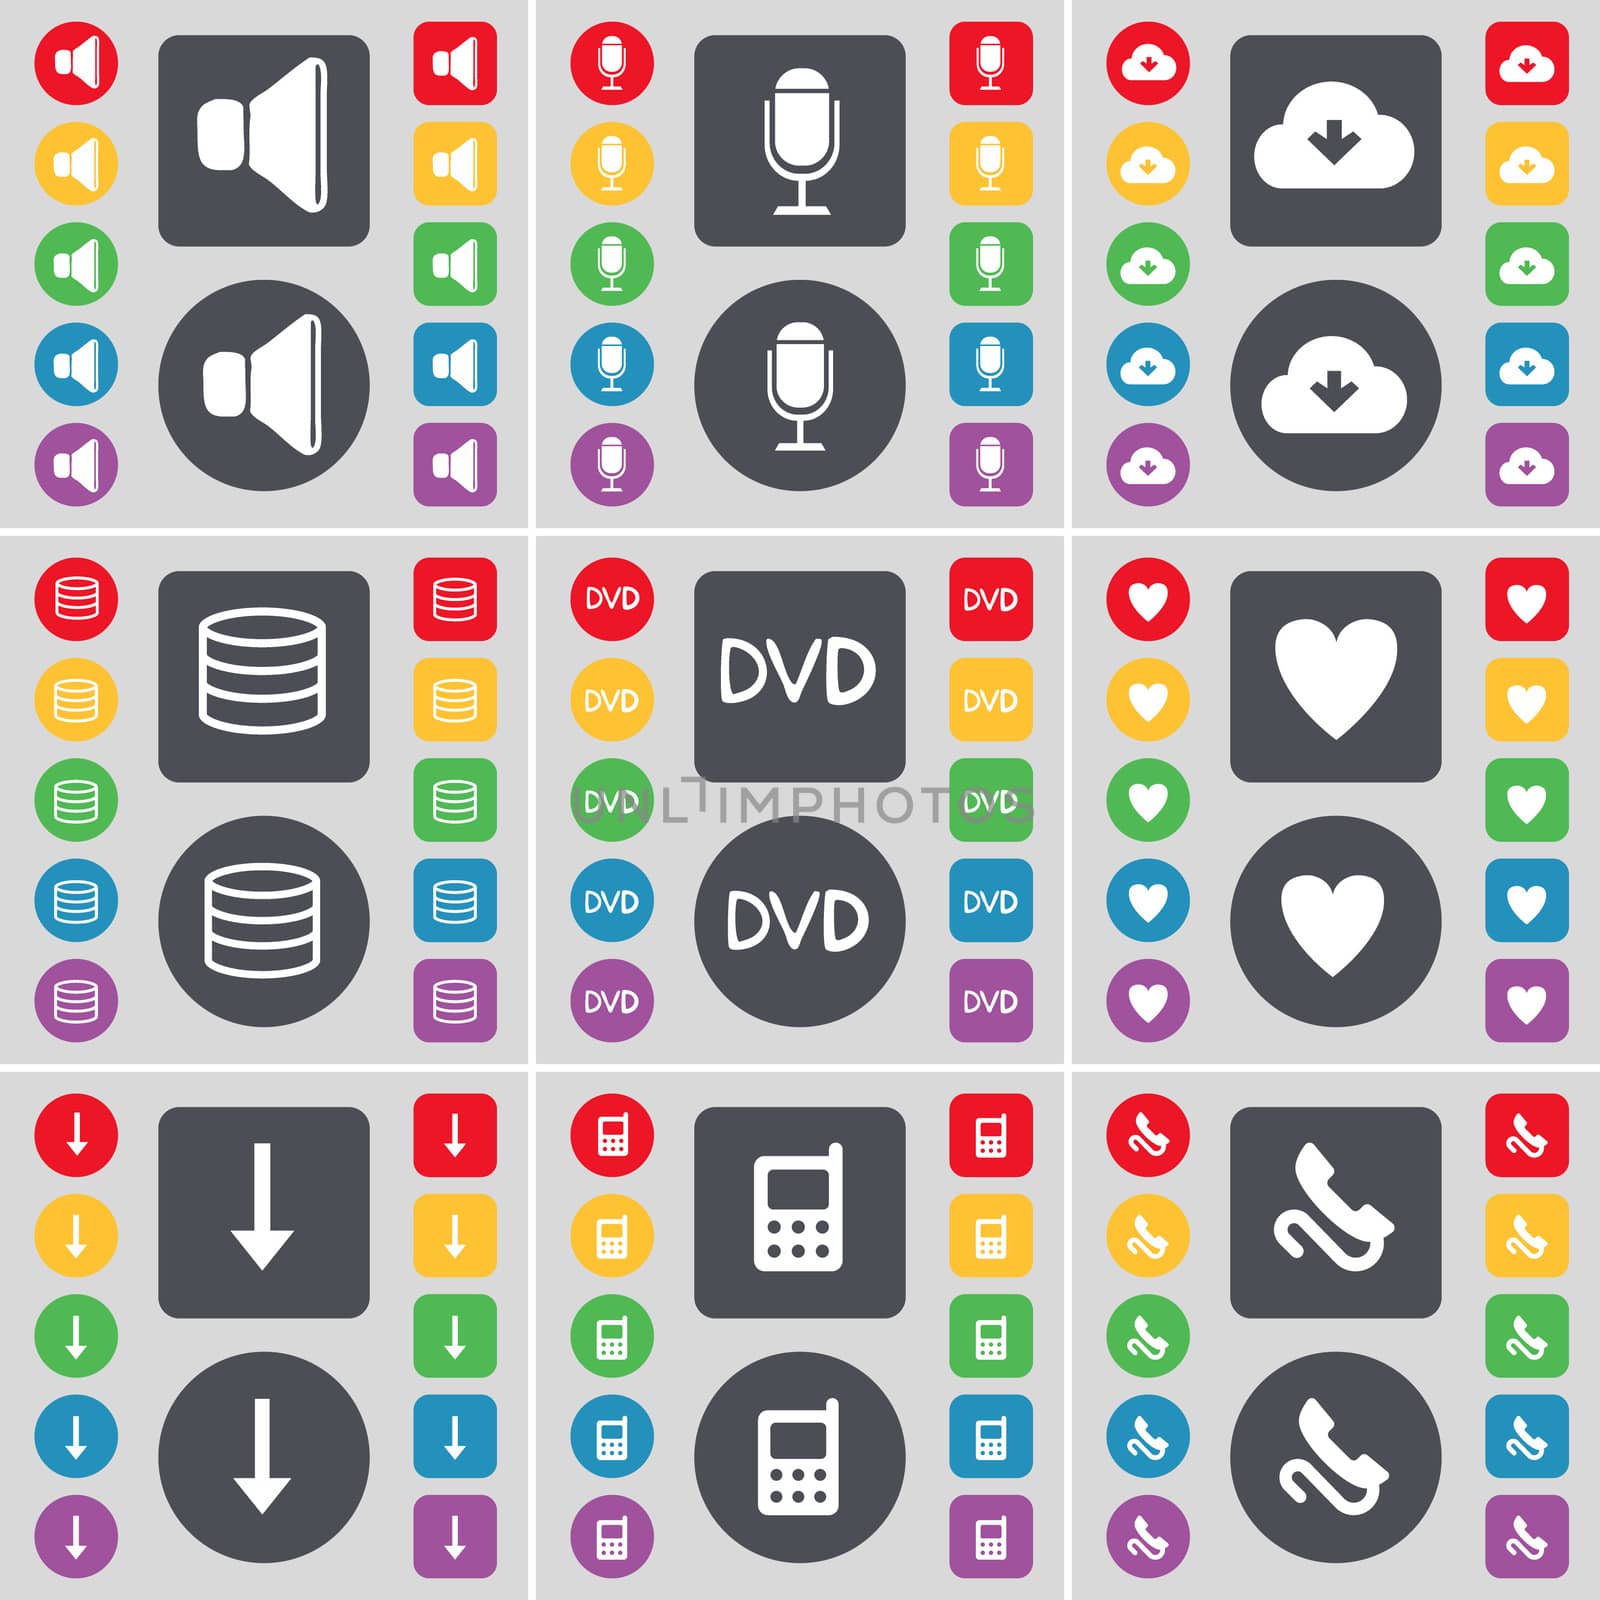 Sound, Microphone, Cloud, Database, DVD, Heart, Arrow down, Mobile phone, Receiver icon symbol. A large set of flat, colored buttons for your design. illustration